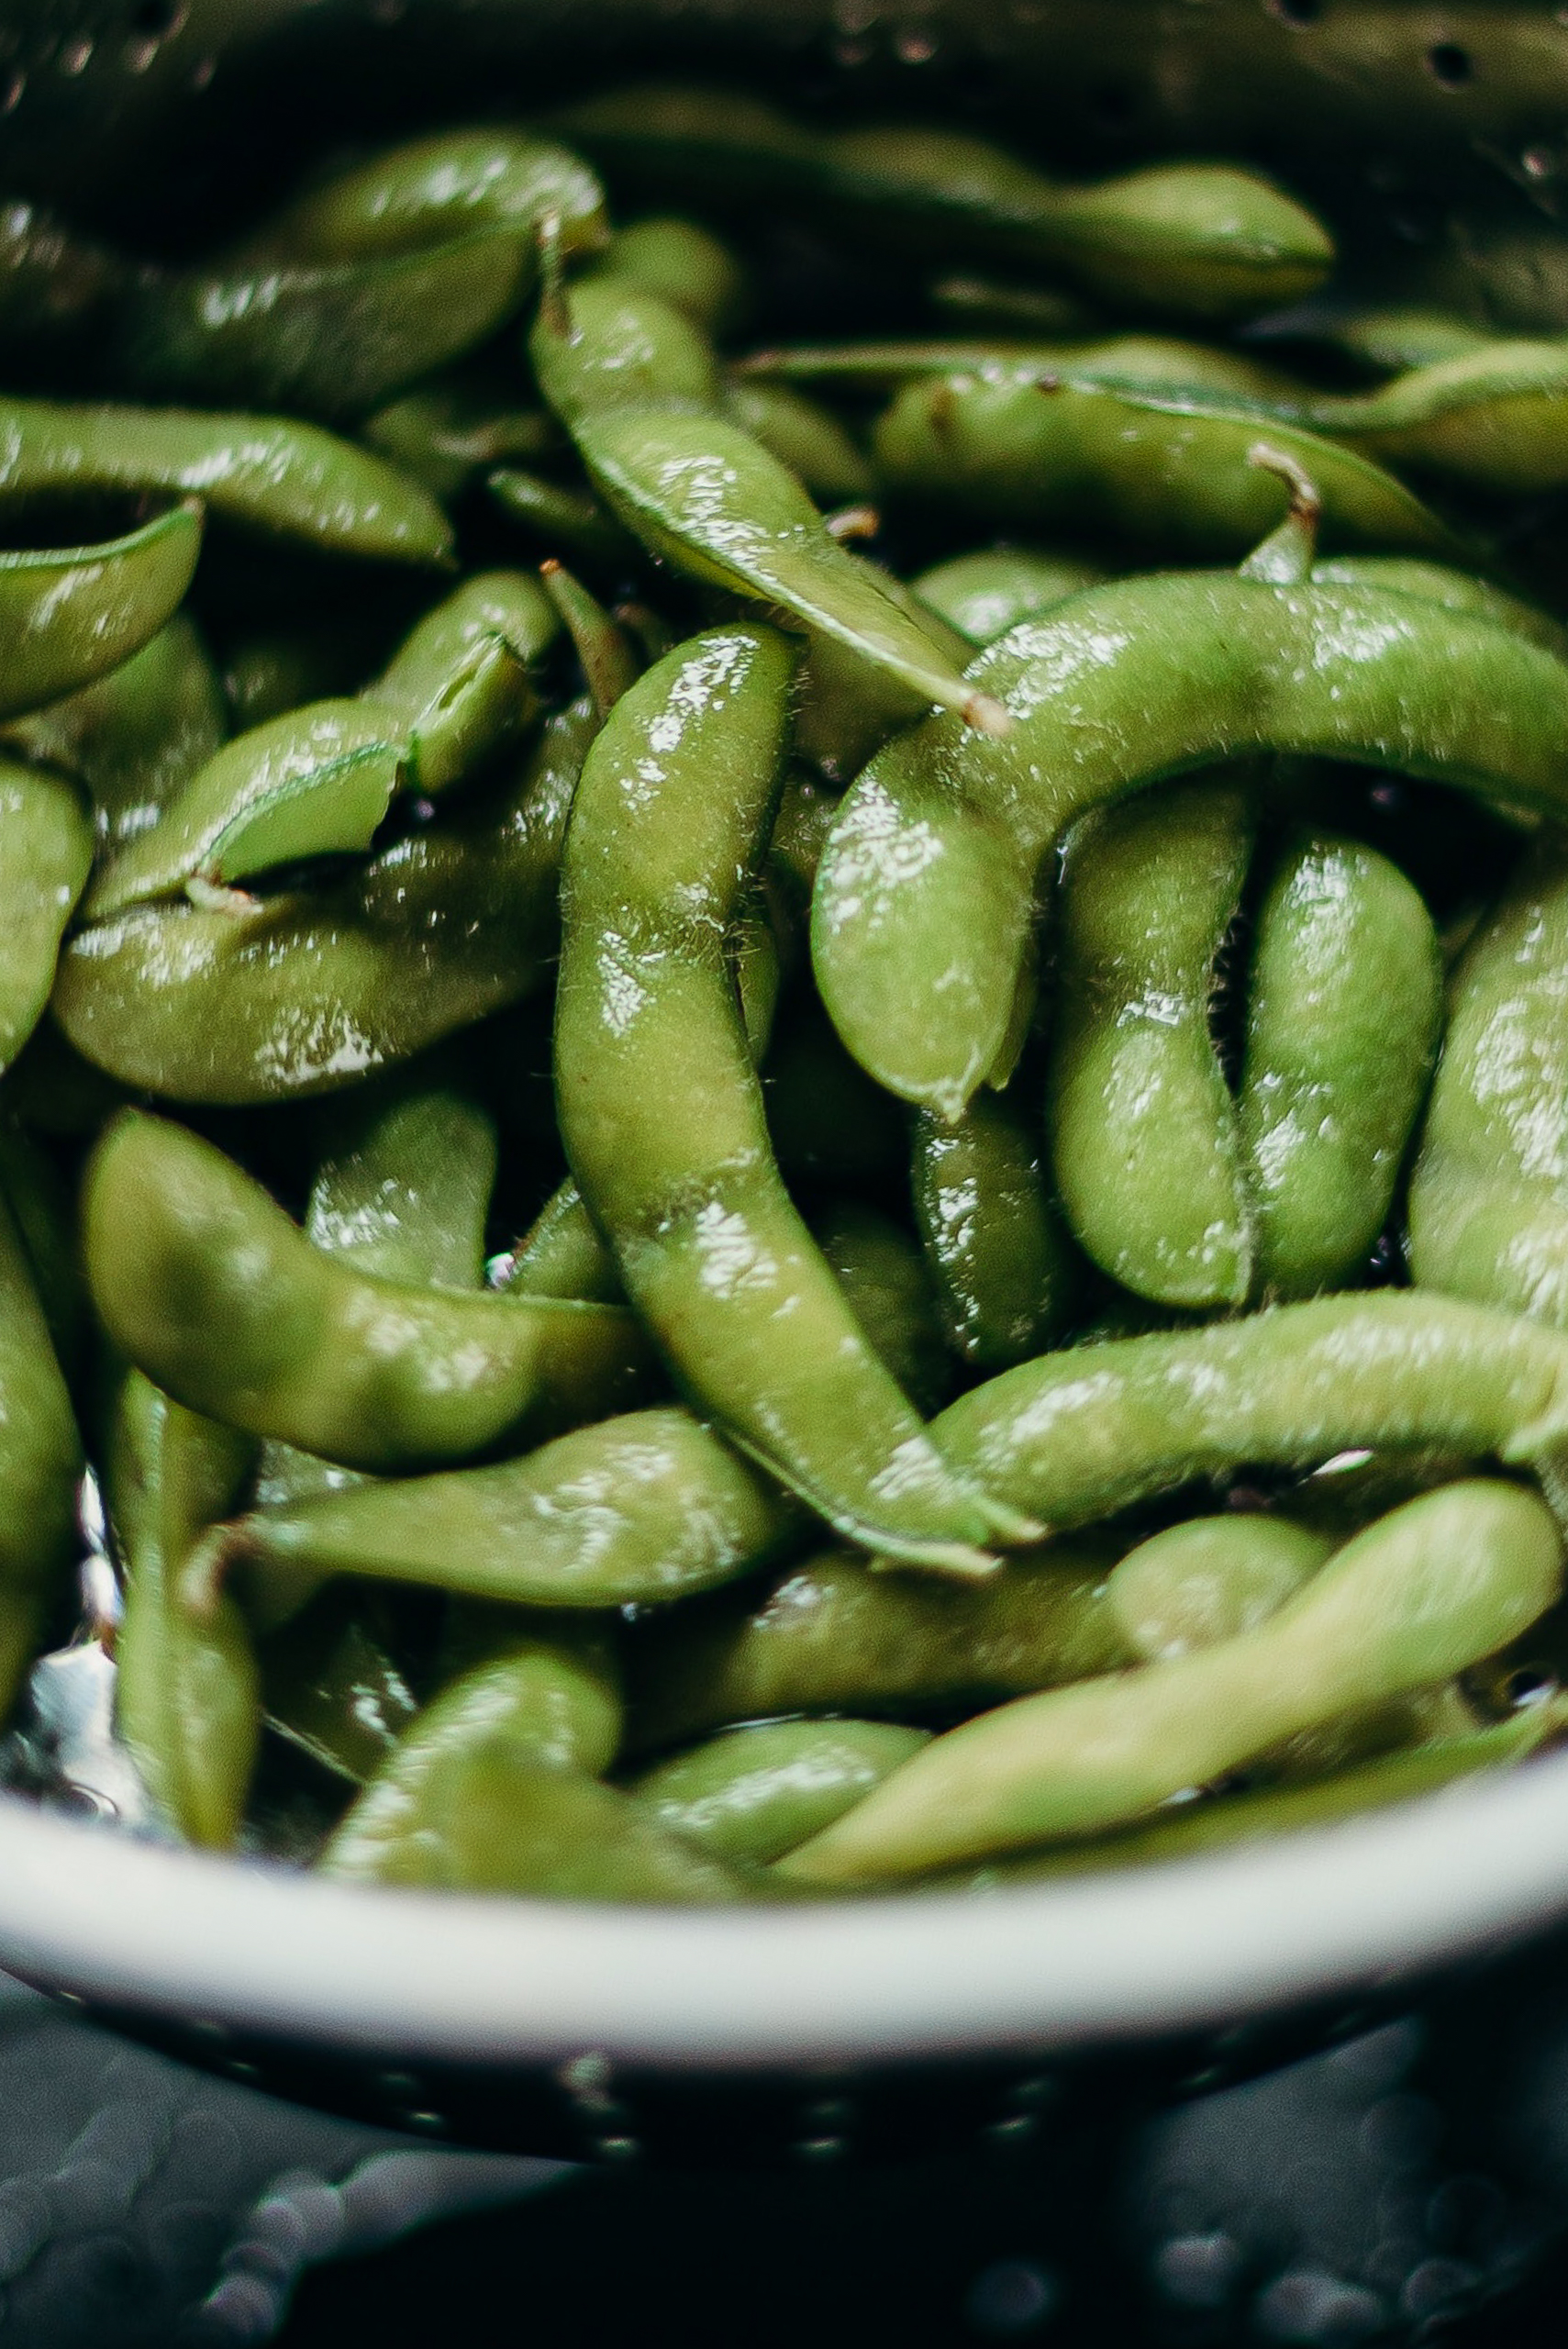 Edamame VS Soybeans: Which is Better?